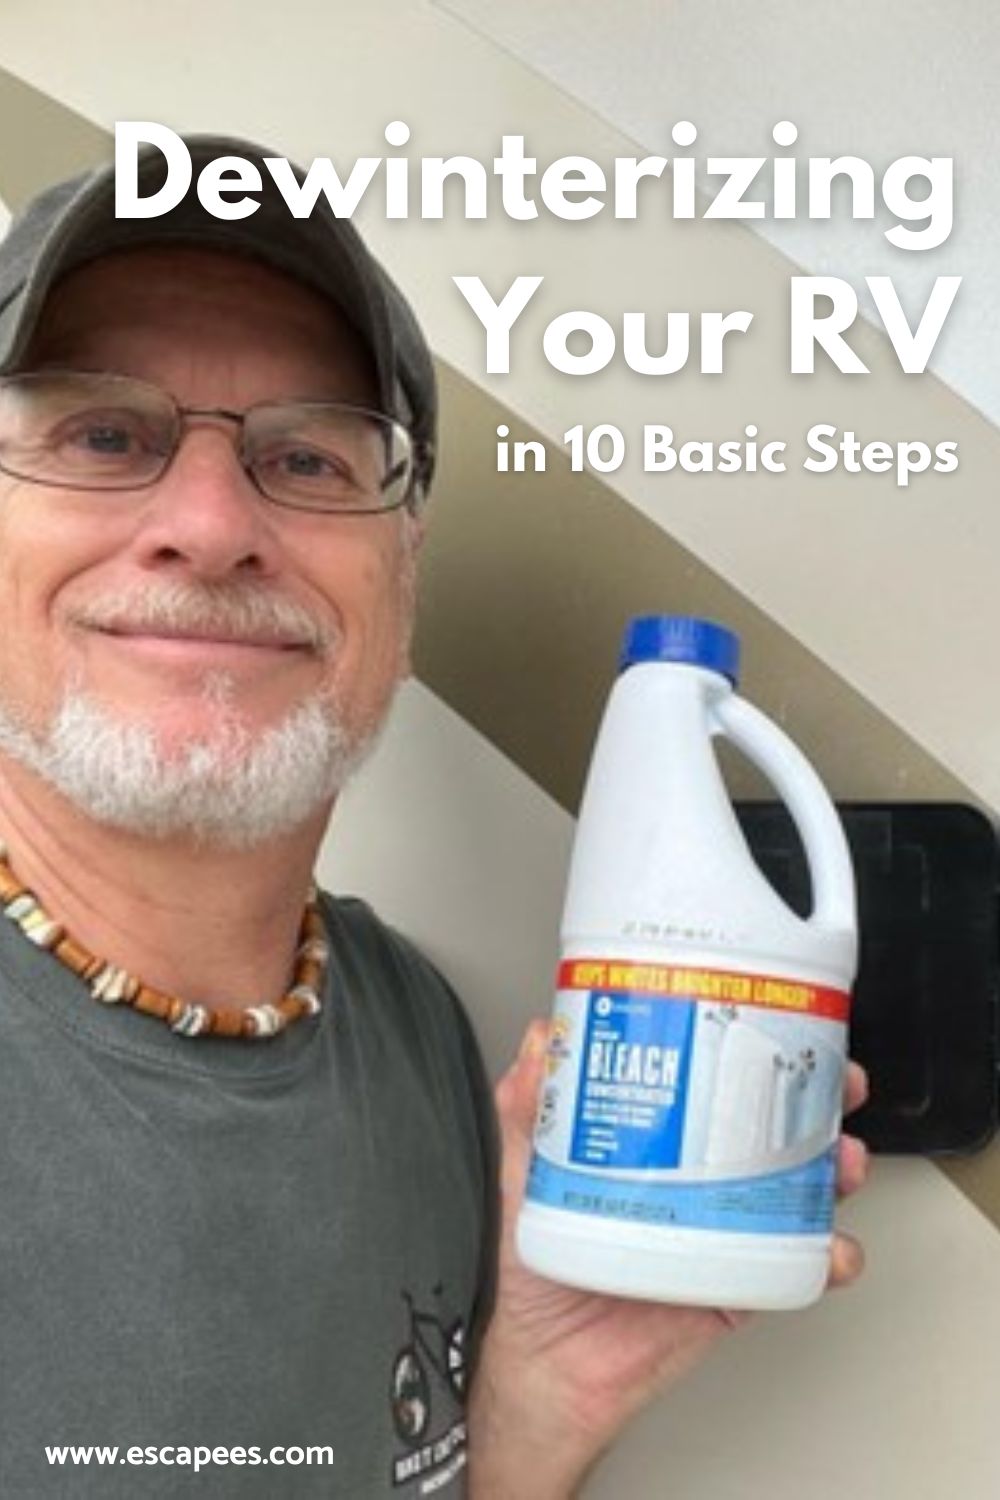 How To Dewinterize Your RV In 10 Basic Steps 35